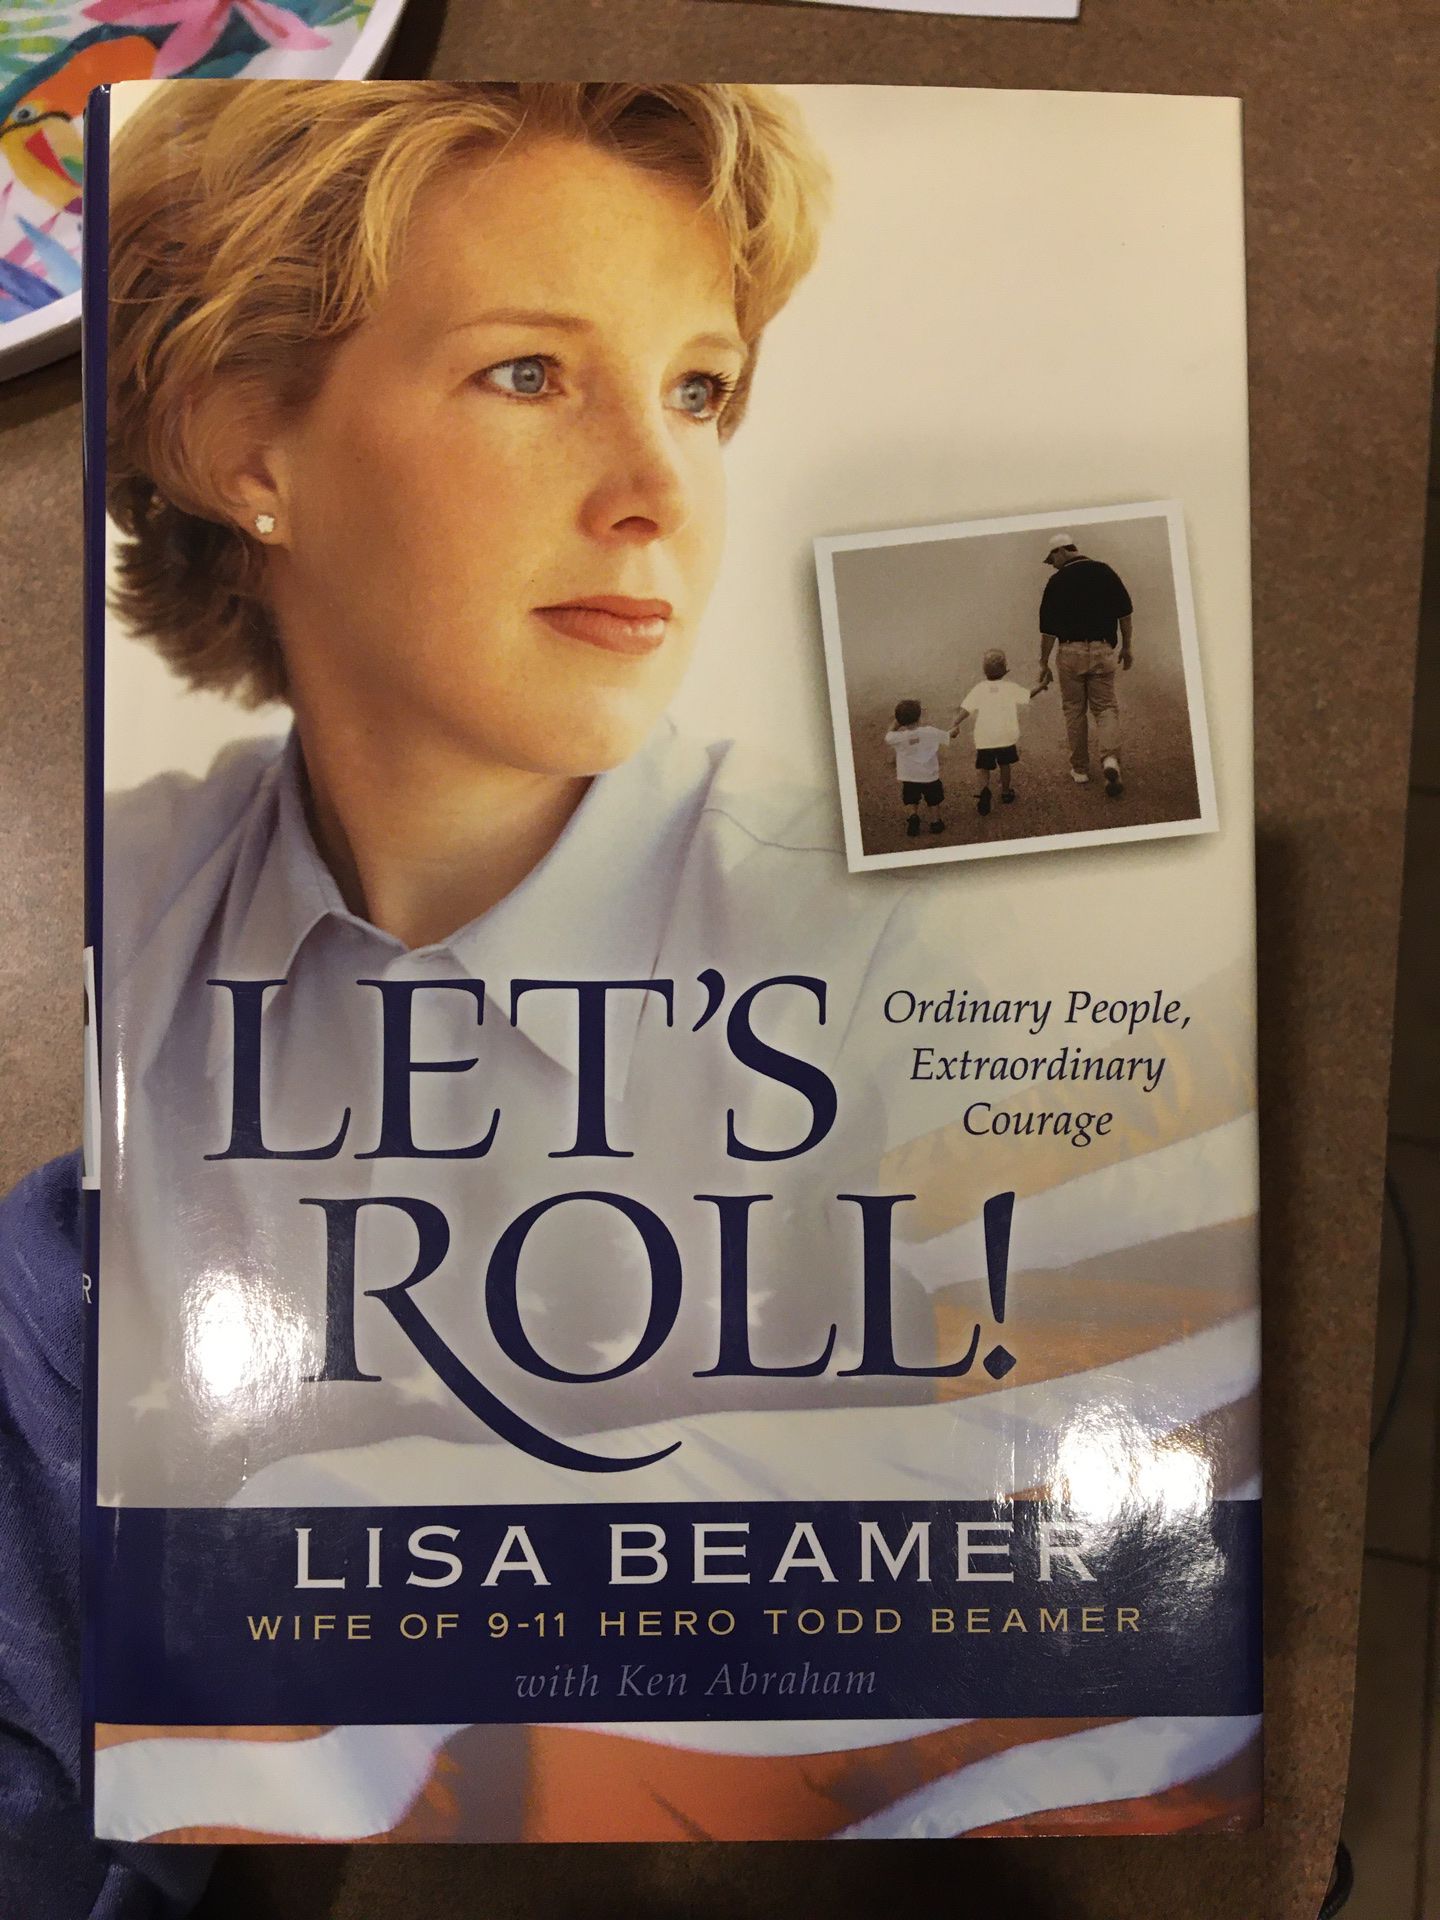 Let’s Roll! by Lisa Beamer - a 9/11 biography (hardcover)